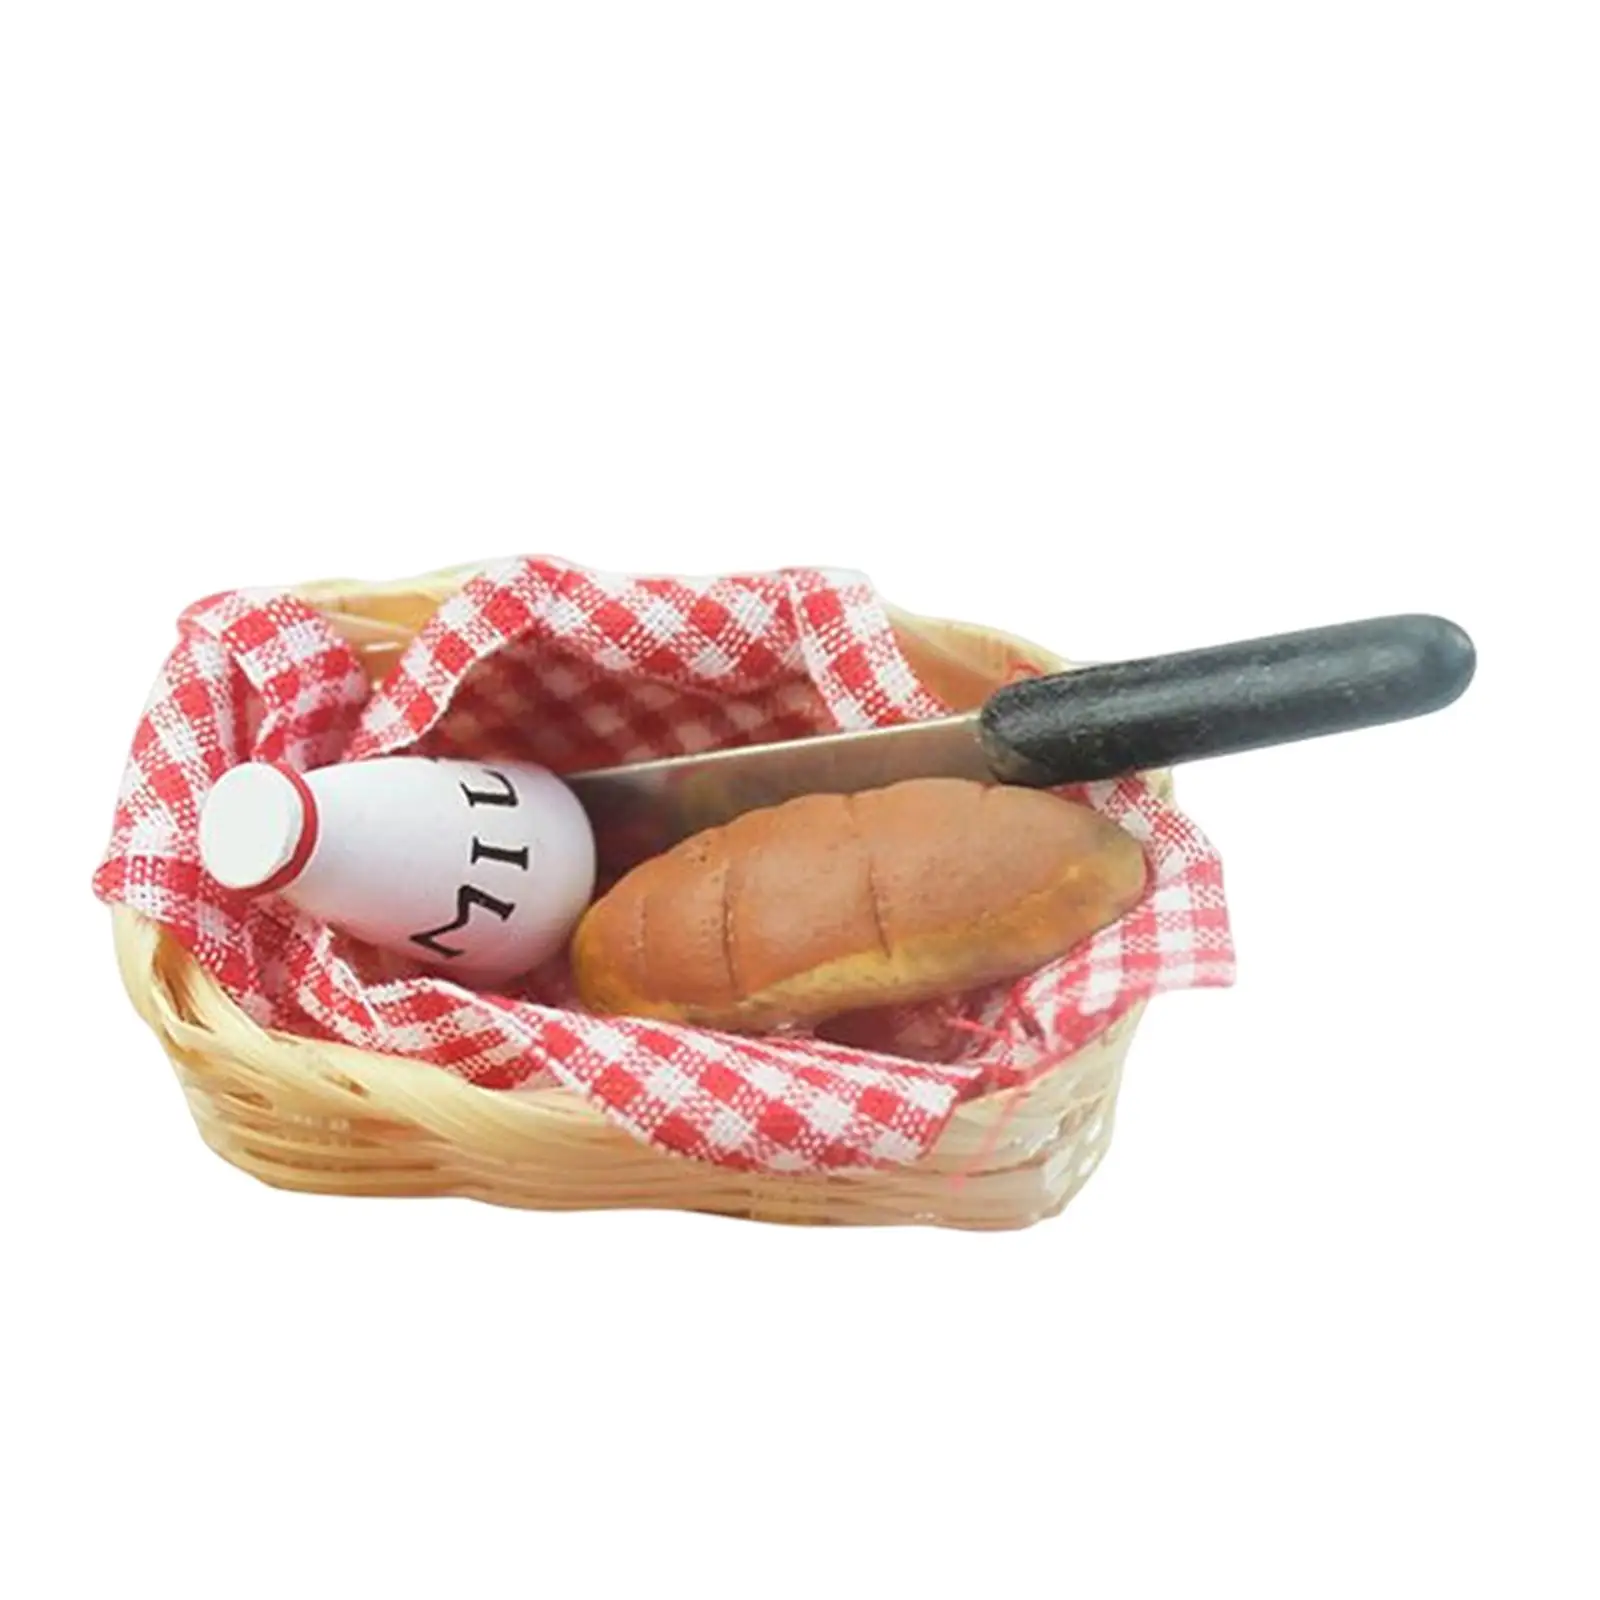 1/12 Miniature Bread Basket Tiny Food Dollhouse Decoration Accessories Picnic Basket for Dining Table Resaurant Decoration